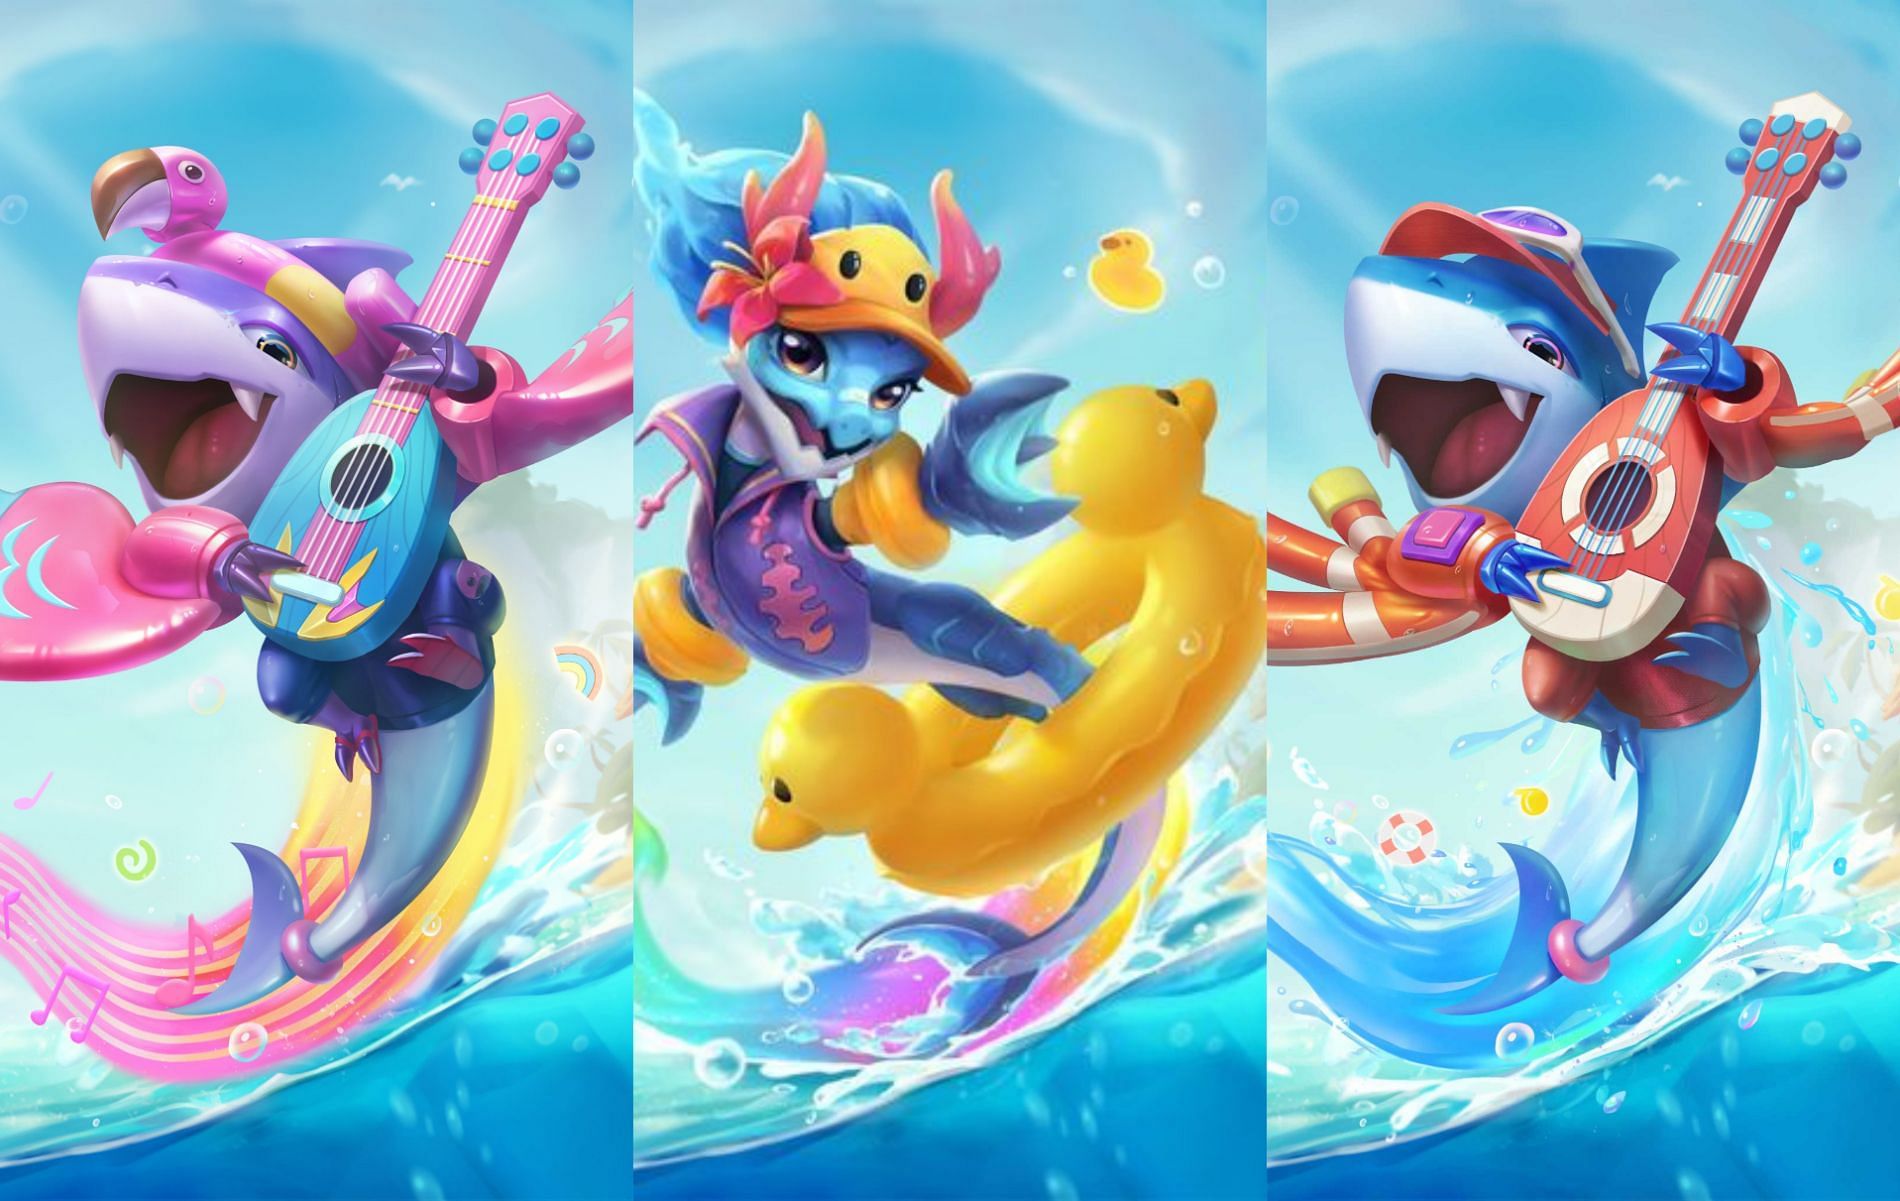 Pool Party Eggs in Teamfight Tactics 12.15 (Images via Riot Games)